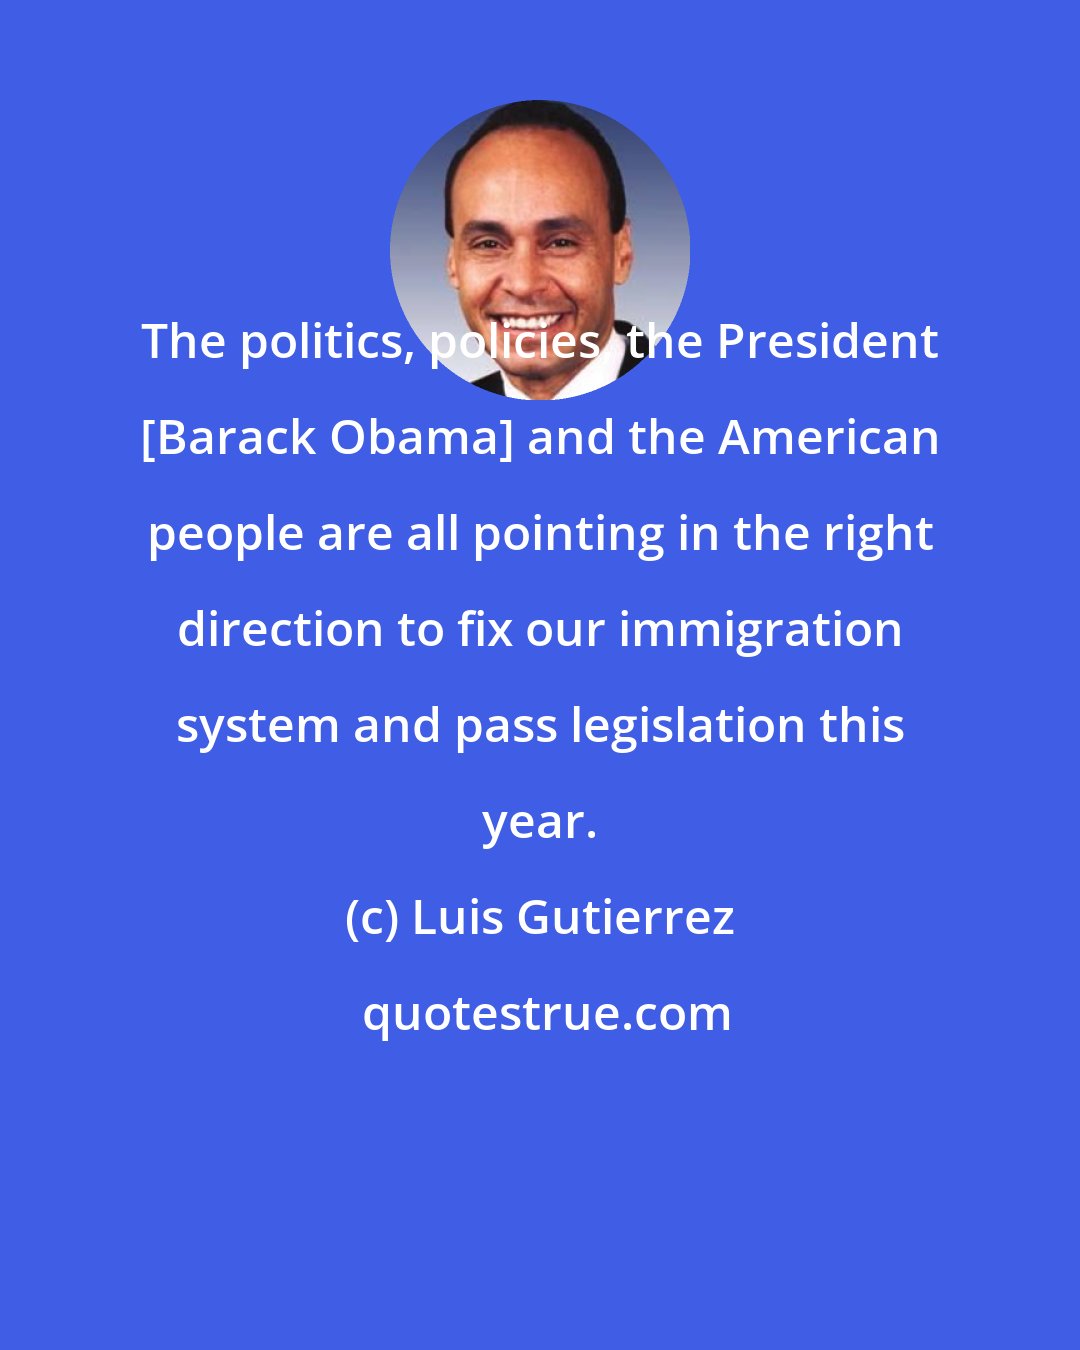 Luis Gutierrez: The politics, policies, the President [Barack Obama] and the American people are all pointing in the right direction to fix our immigration system and pass legislation this year.